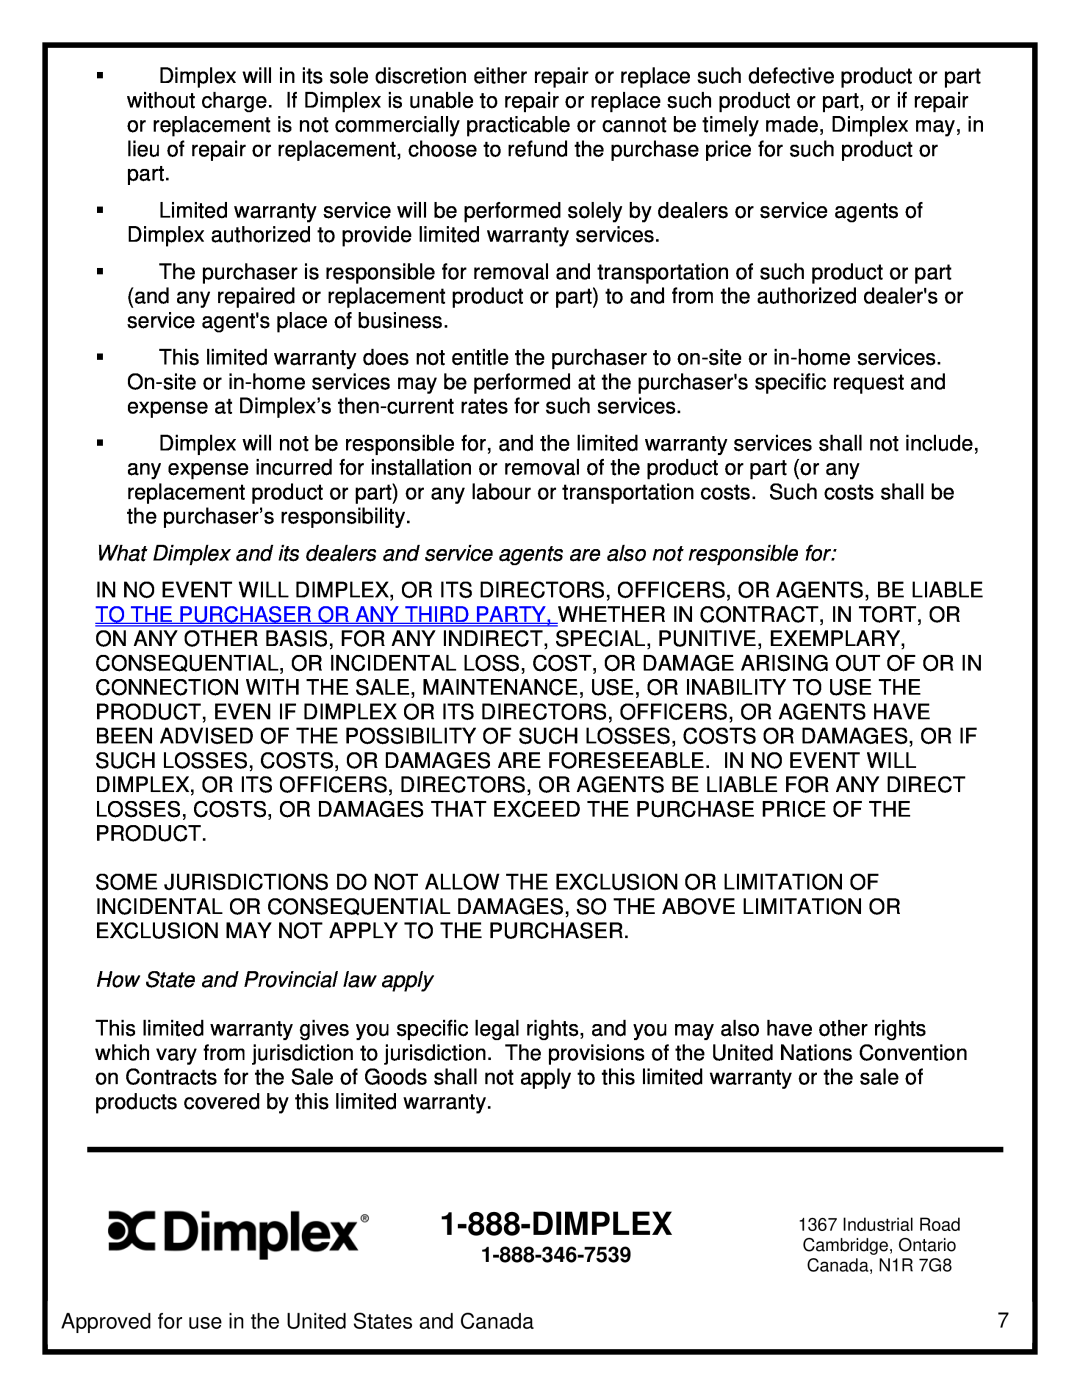 Dimplex DFOR2307, DFO2307 manual Dimplex, How State and Provincial law apply 